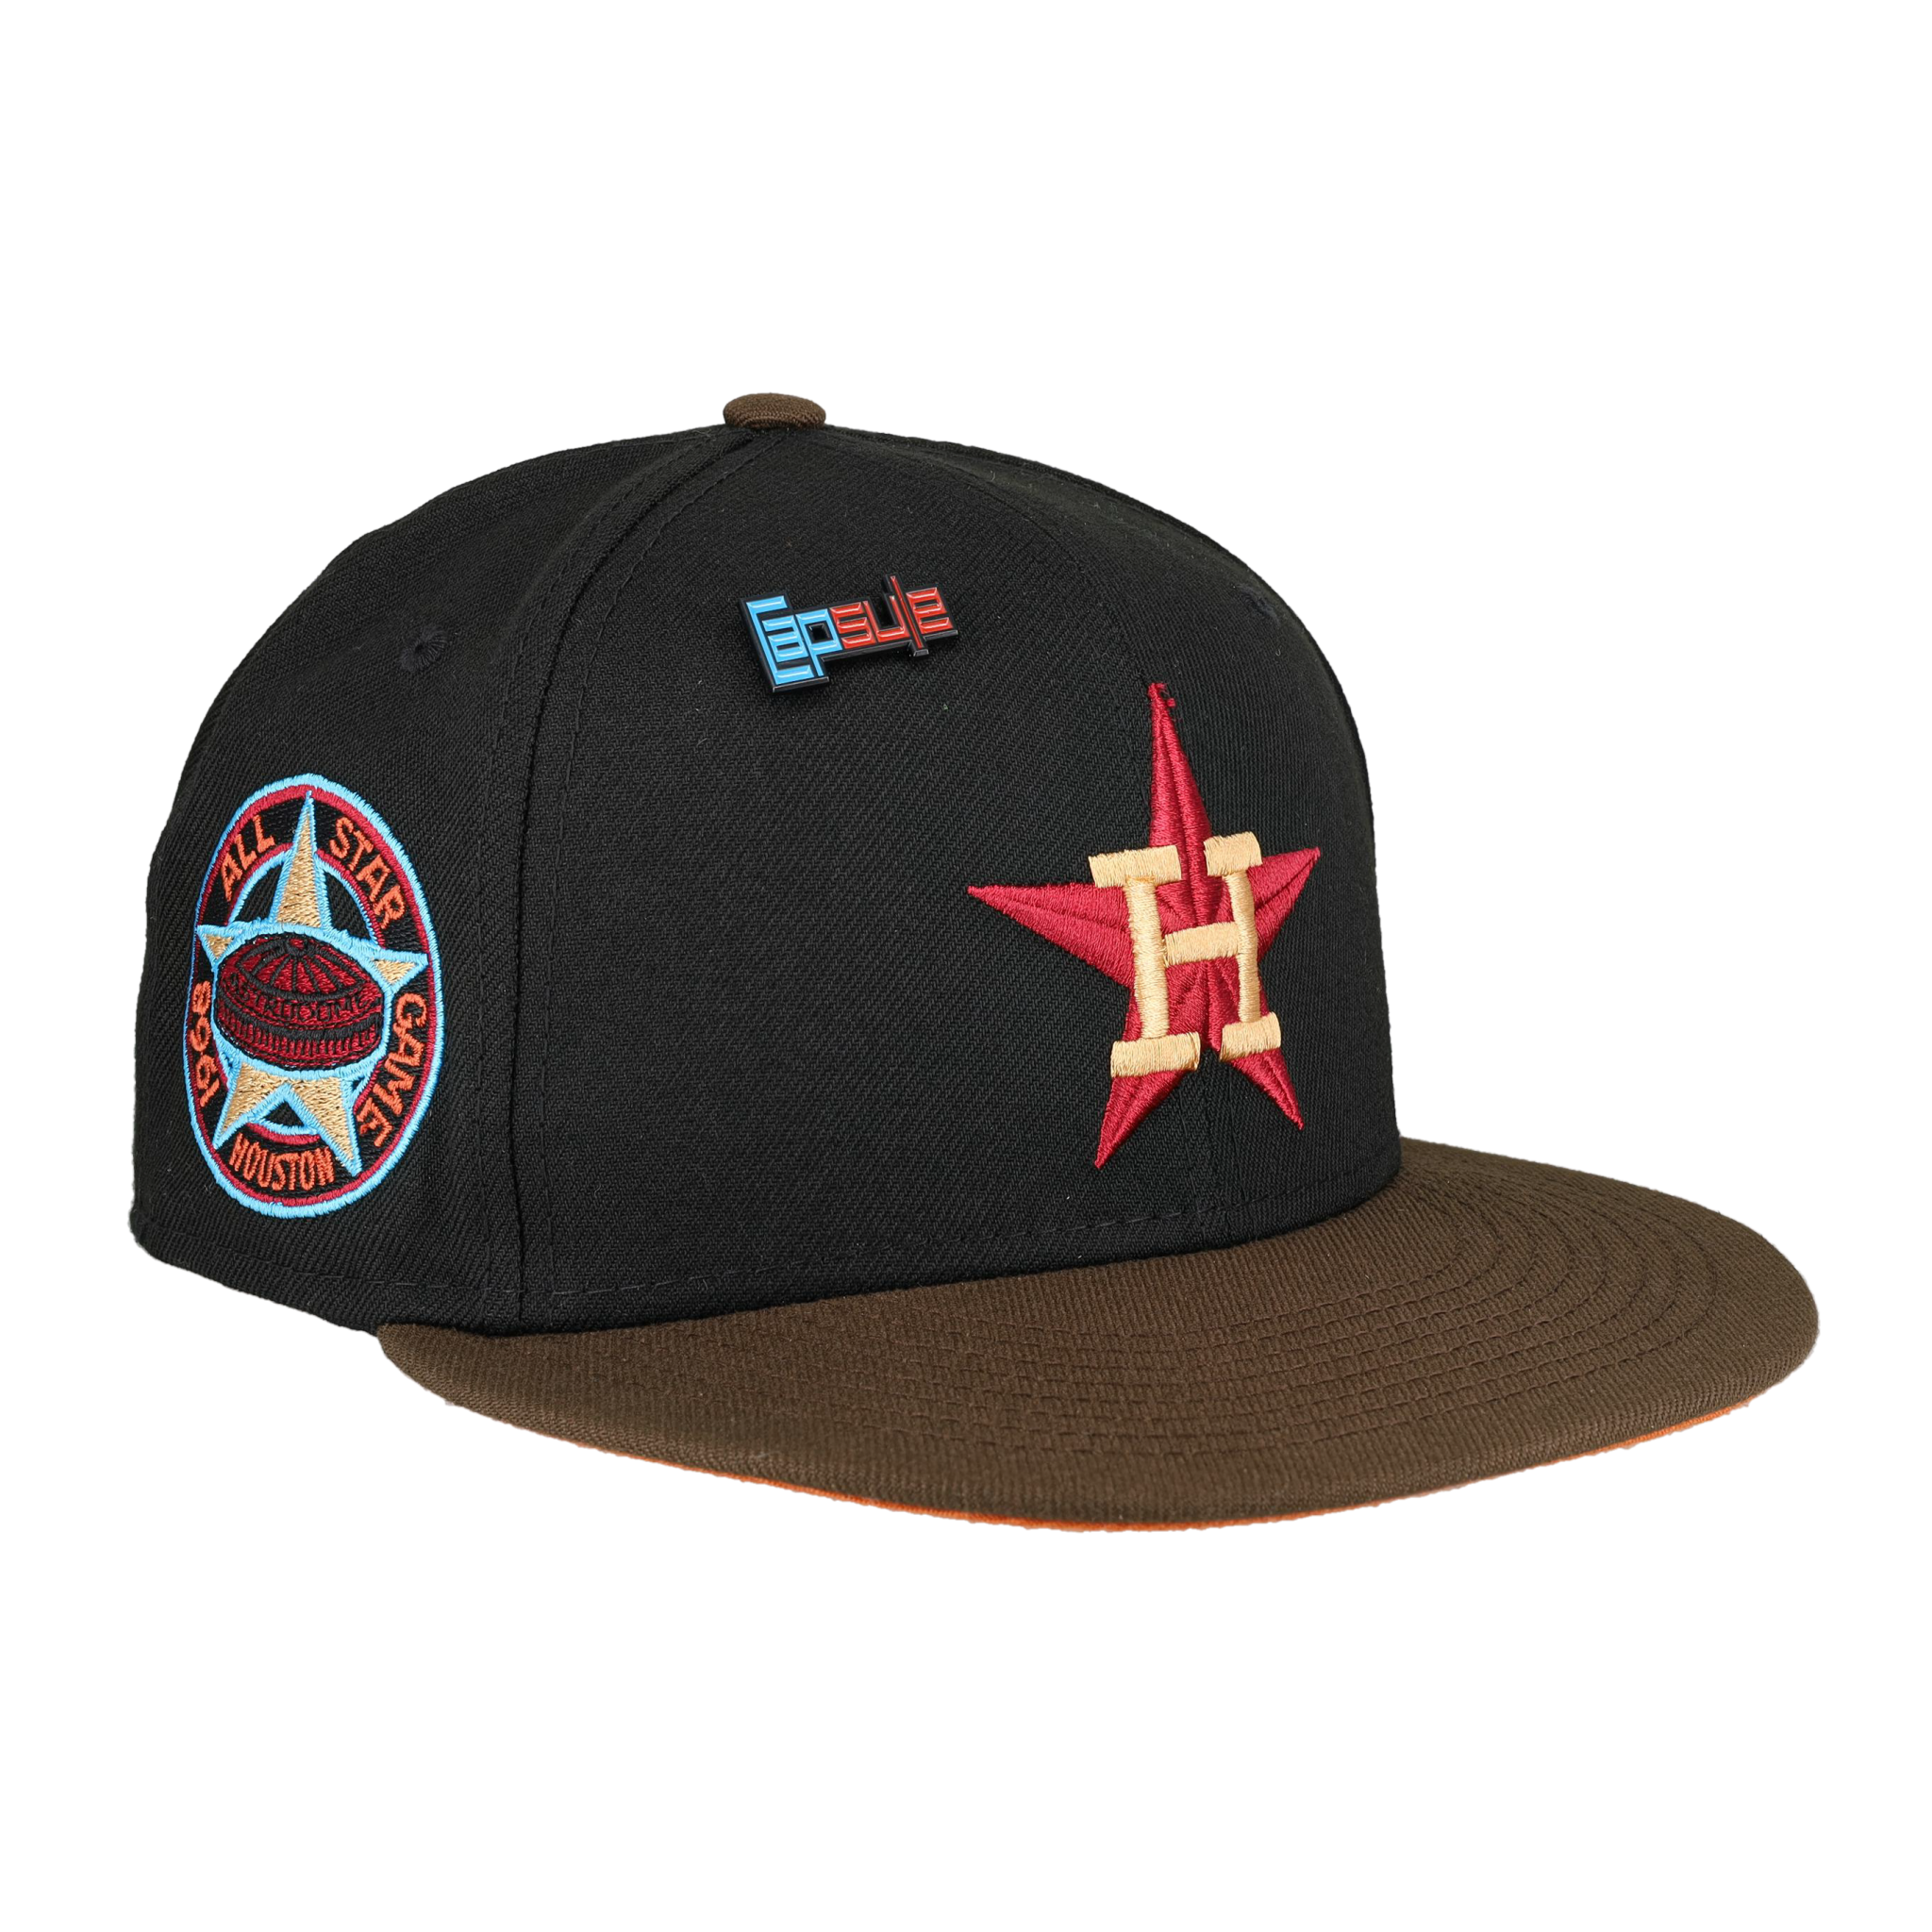 Houston Astros New Era 1968 MLB All-Star Game Patch Red Undervisor